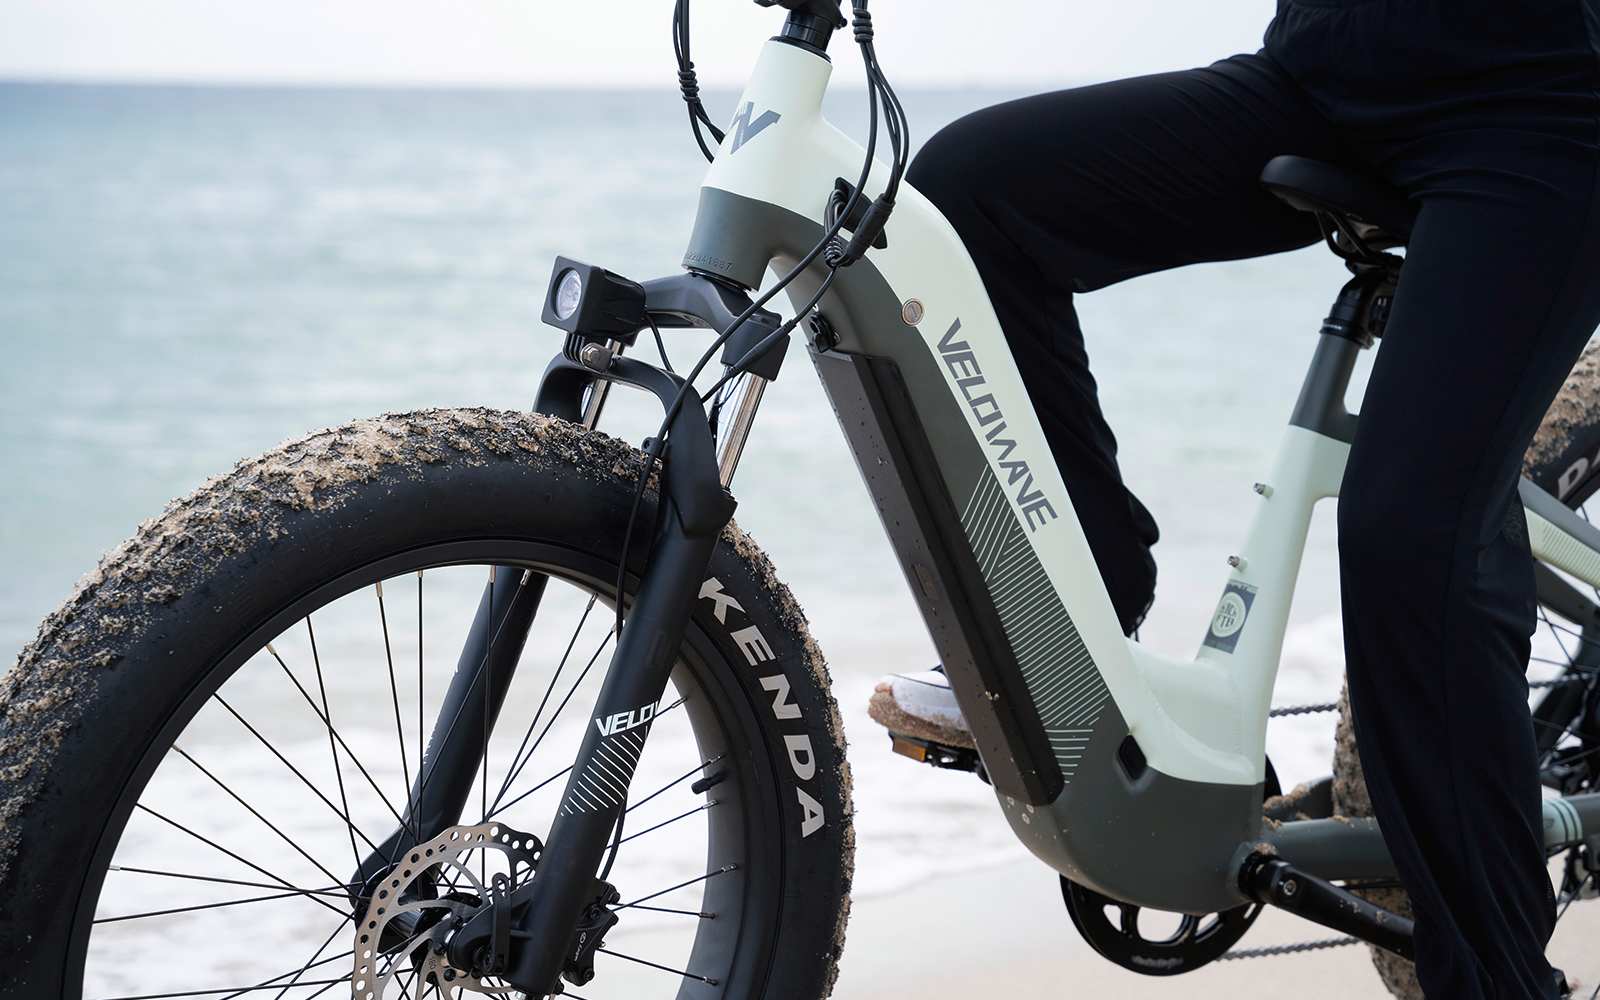 What Do You Need to Know When Choosing the Best Electric Bike Rack?